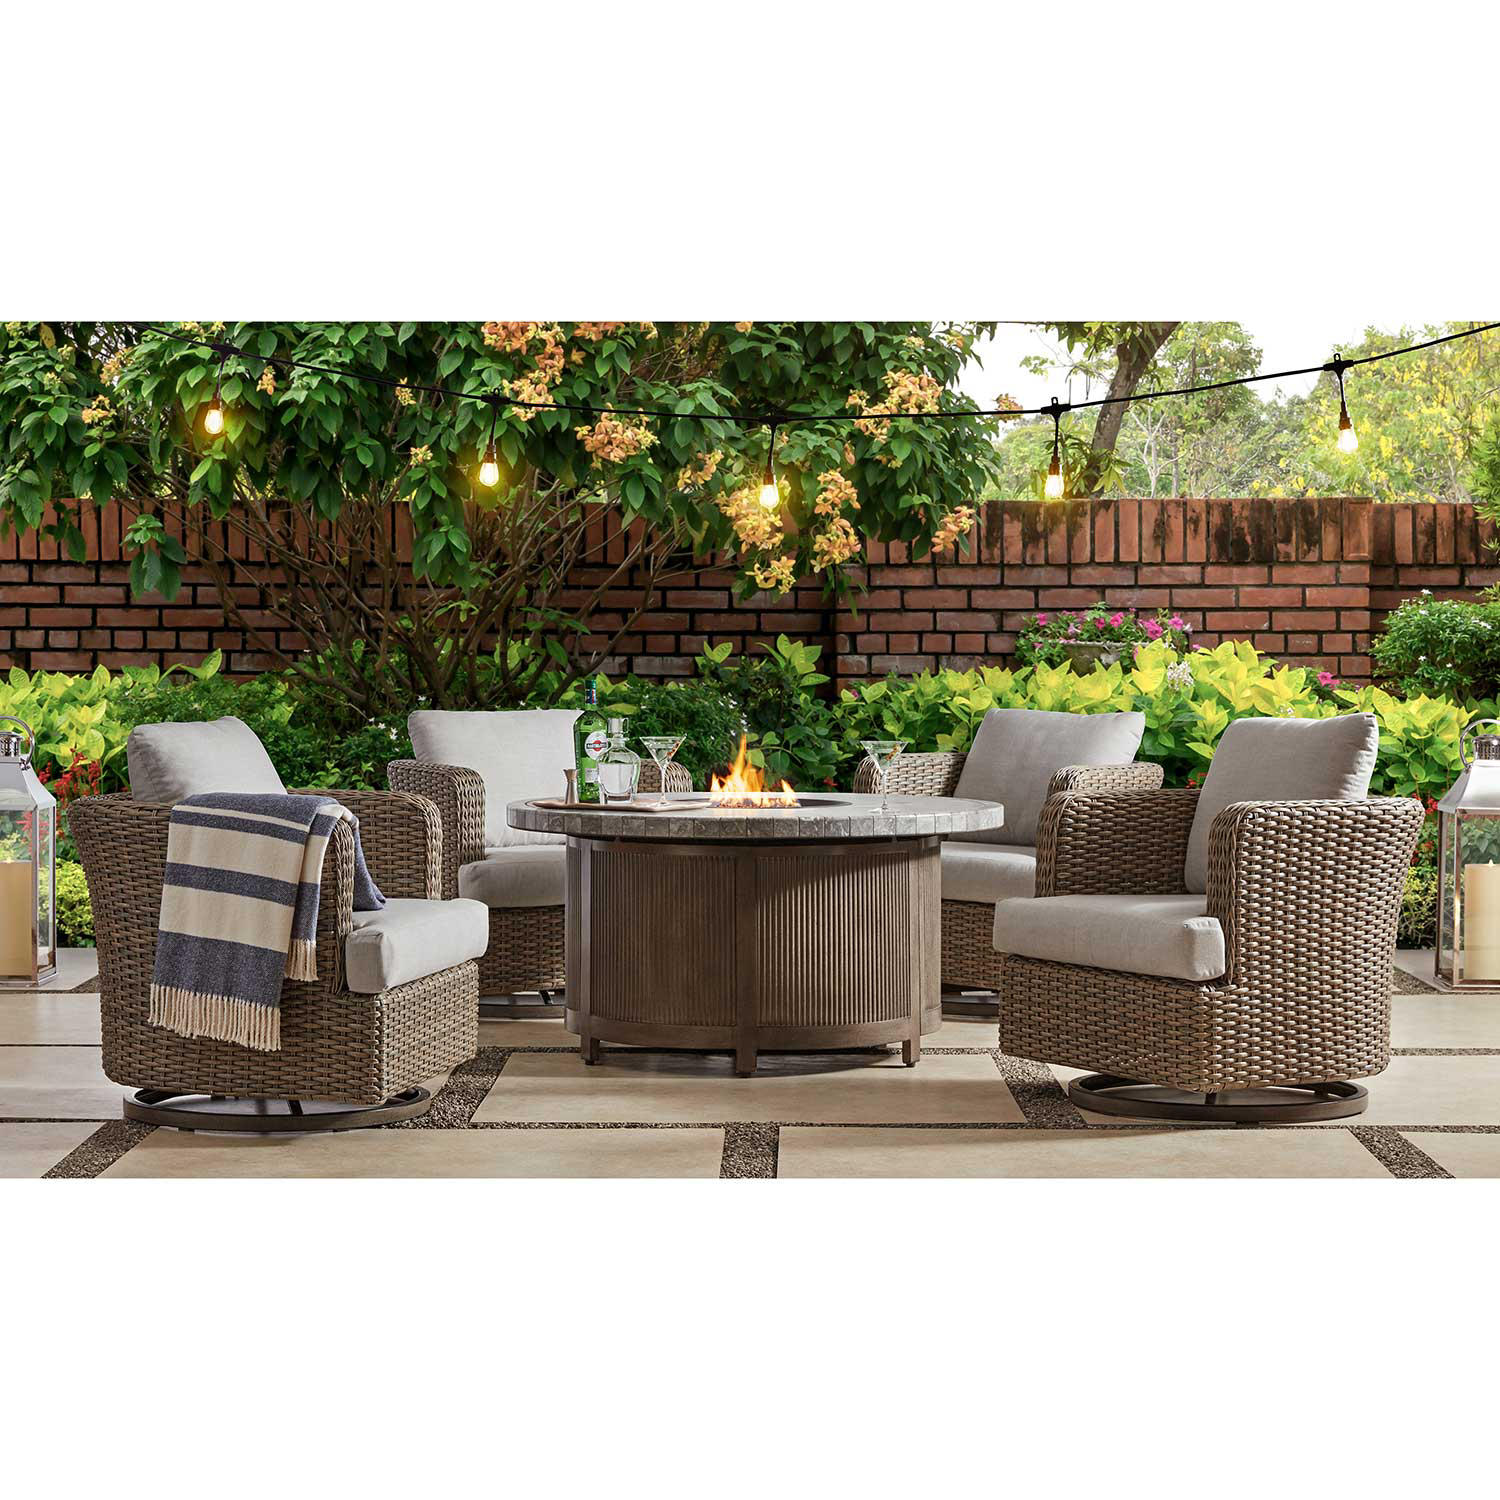 Member’s Mark Brexley 5-Piece Fire Pit Chat Patio Set